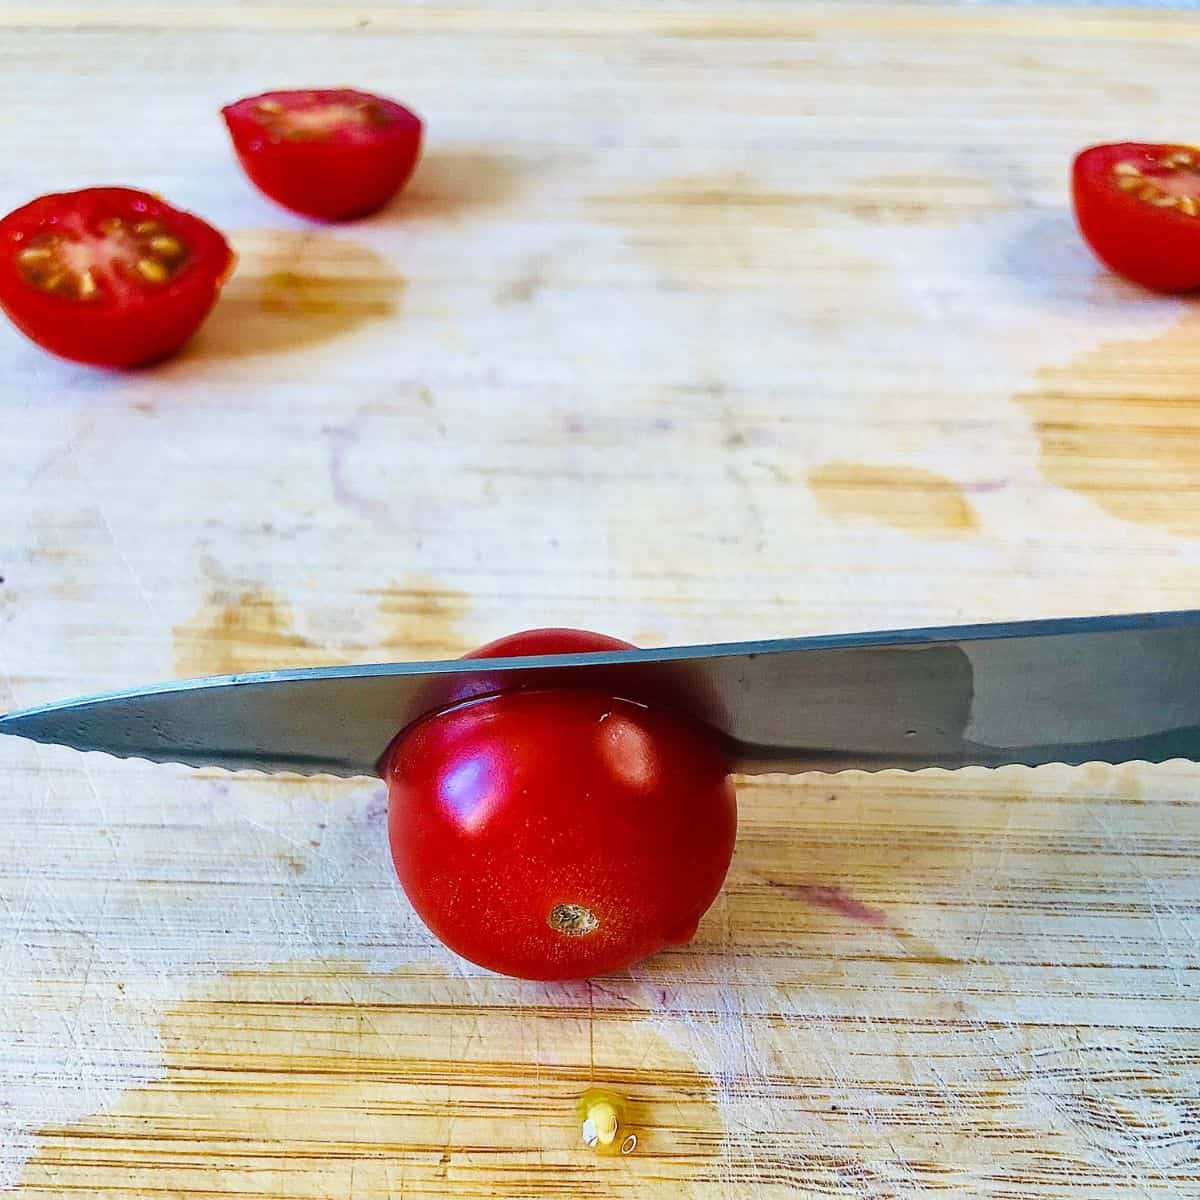 A kitchen knife slicing a cherry tomato in half.